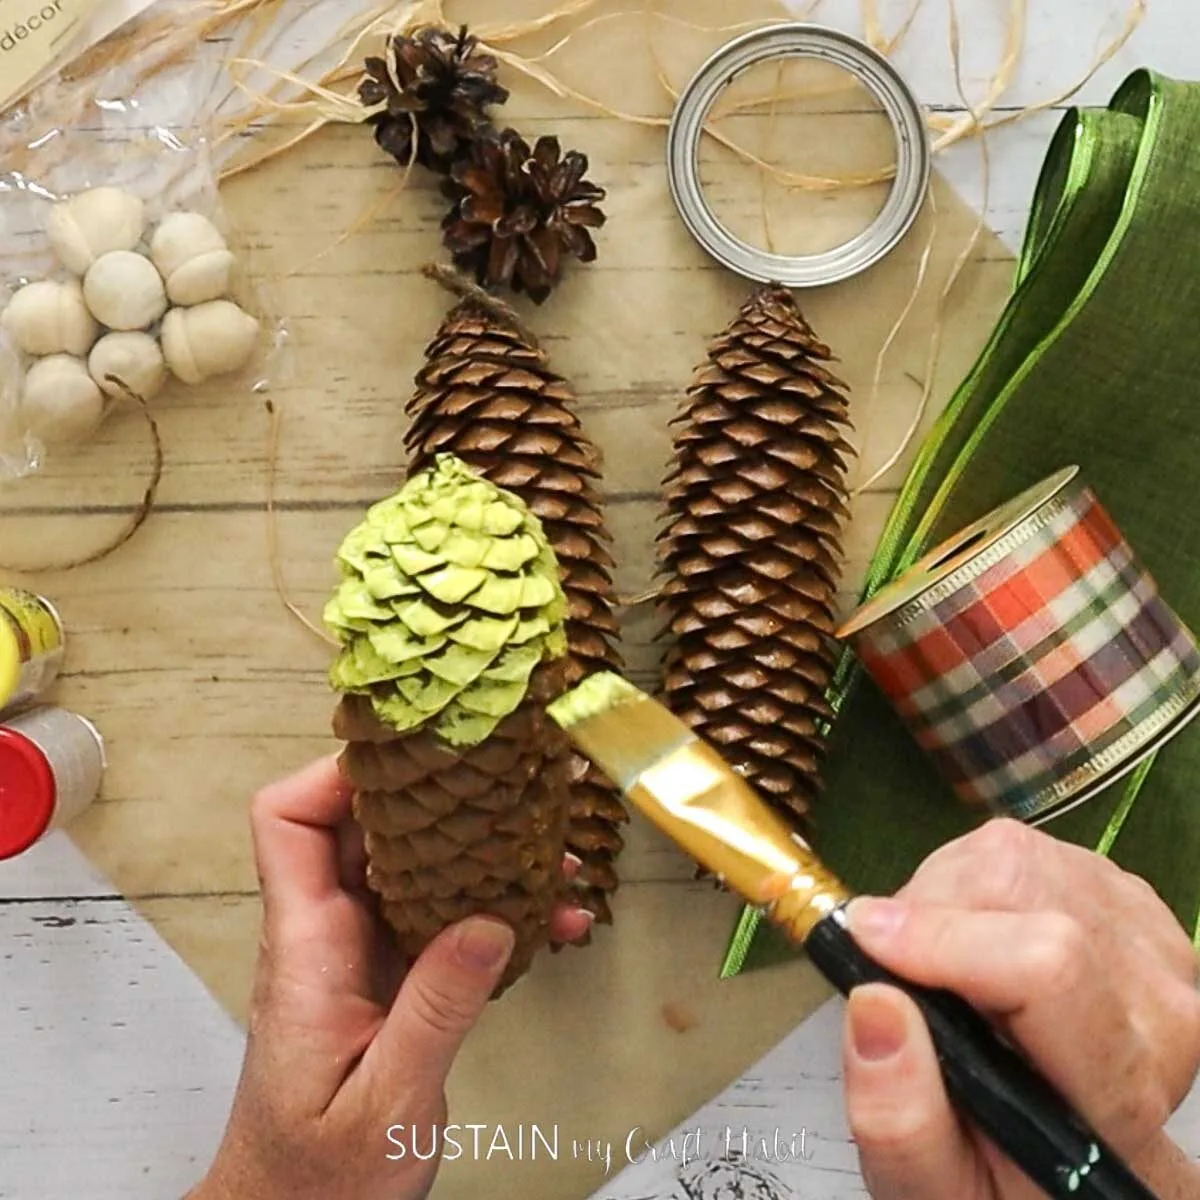 Painting the top half of a pinecone yellow.